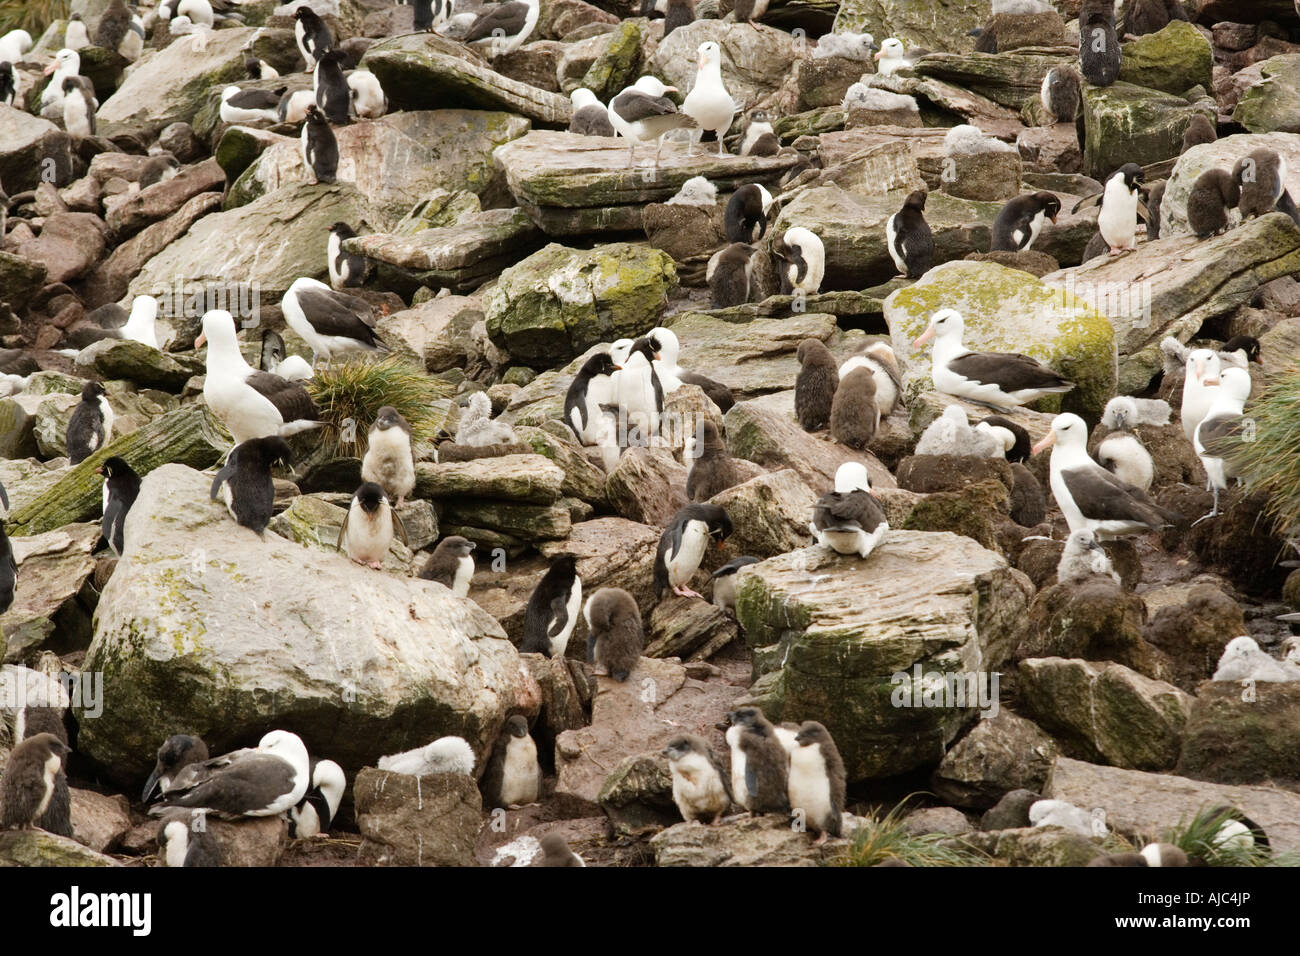 Southern Rockhopper Penguin (Eudyptes chrysocome chrysocome) Colony with Black-Browed Albatross (Diomedea melanophris) Flock Stock Photo